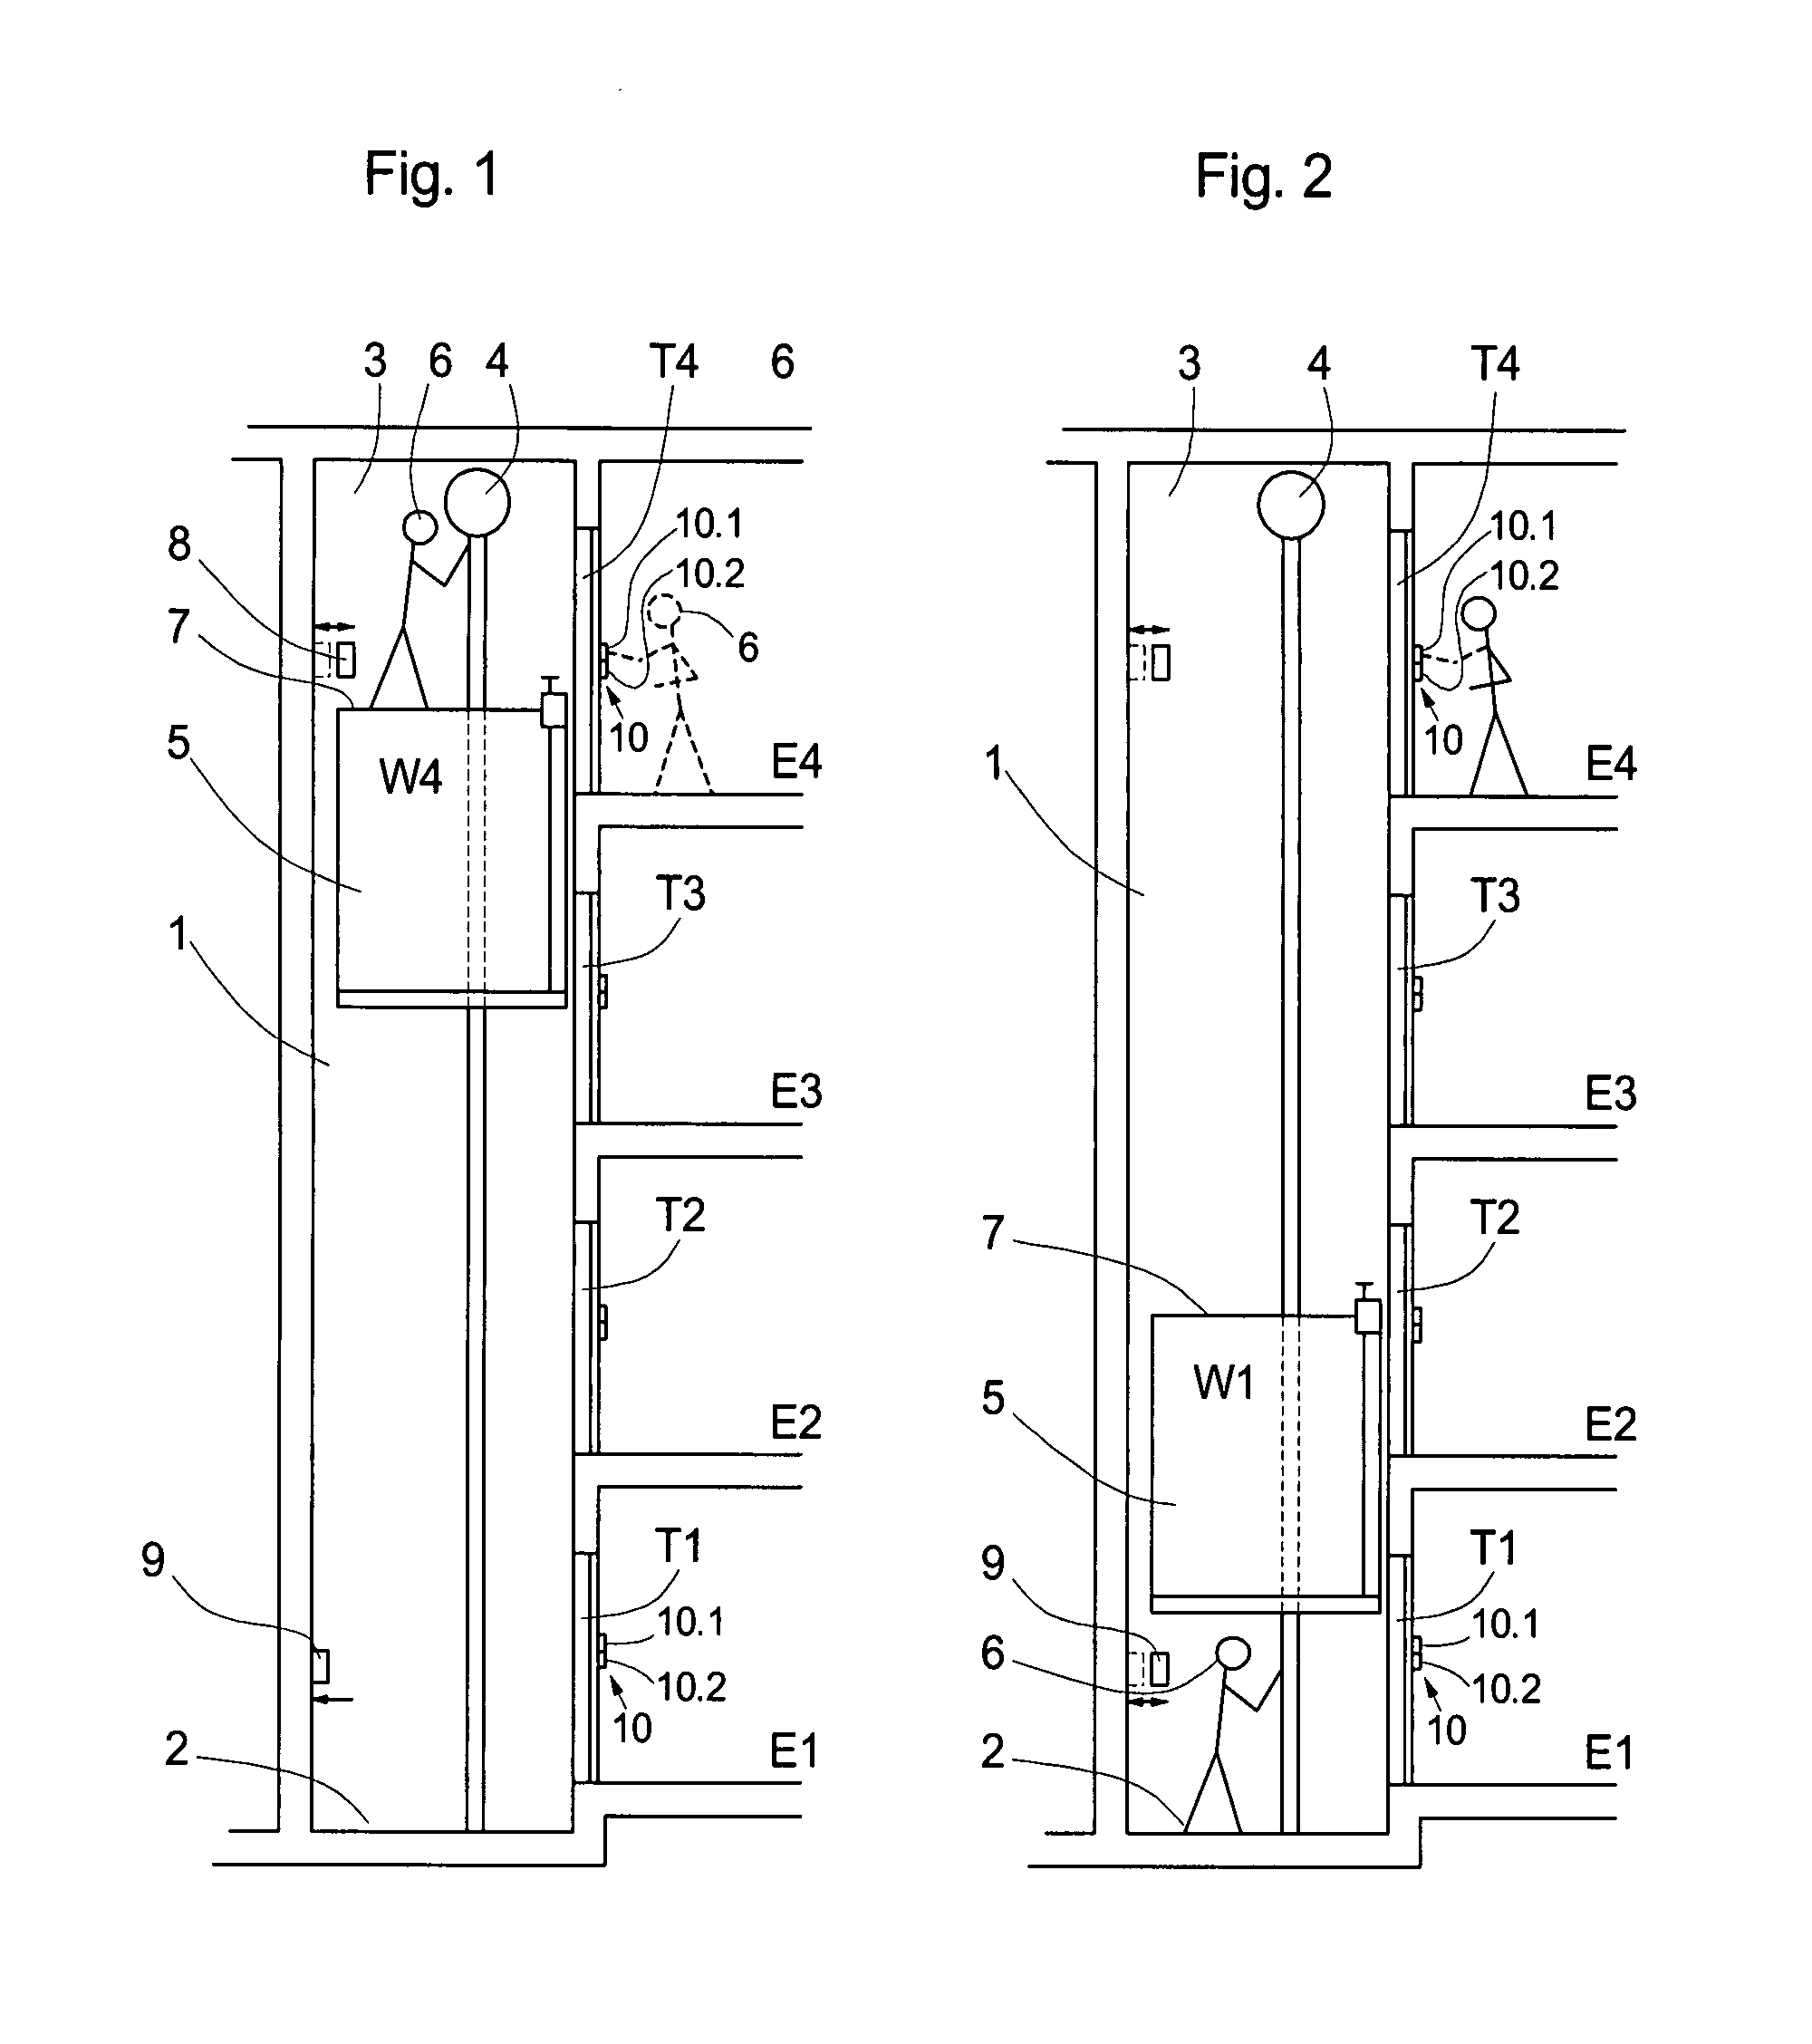 Method of controlling access to an elevator car